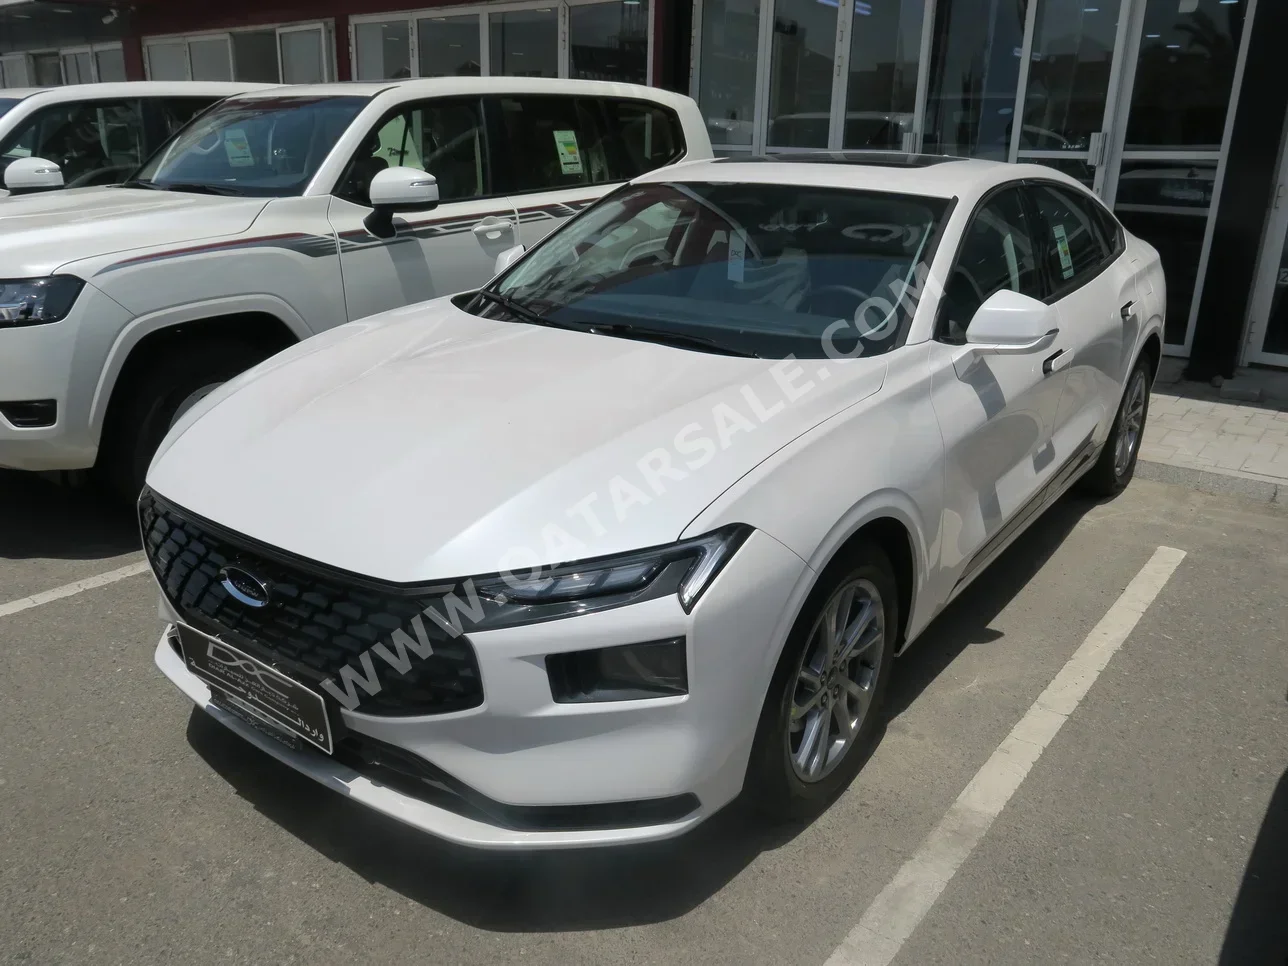 Ford  Taurus  Limited  2024  Automatic  0 Km  4 Cylinder  Four Wheel Drive (4WD)  Sedan  White  With Warranty